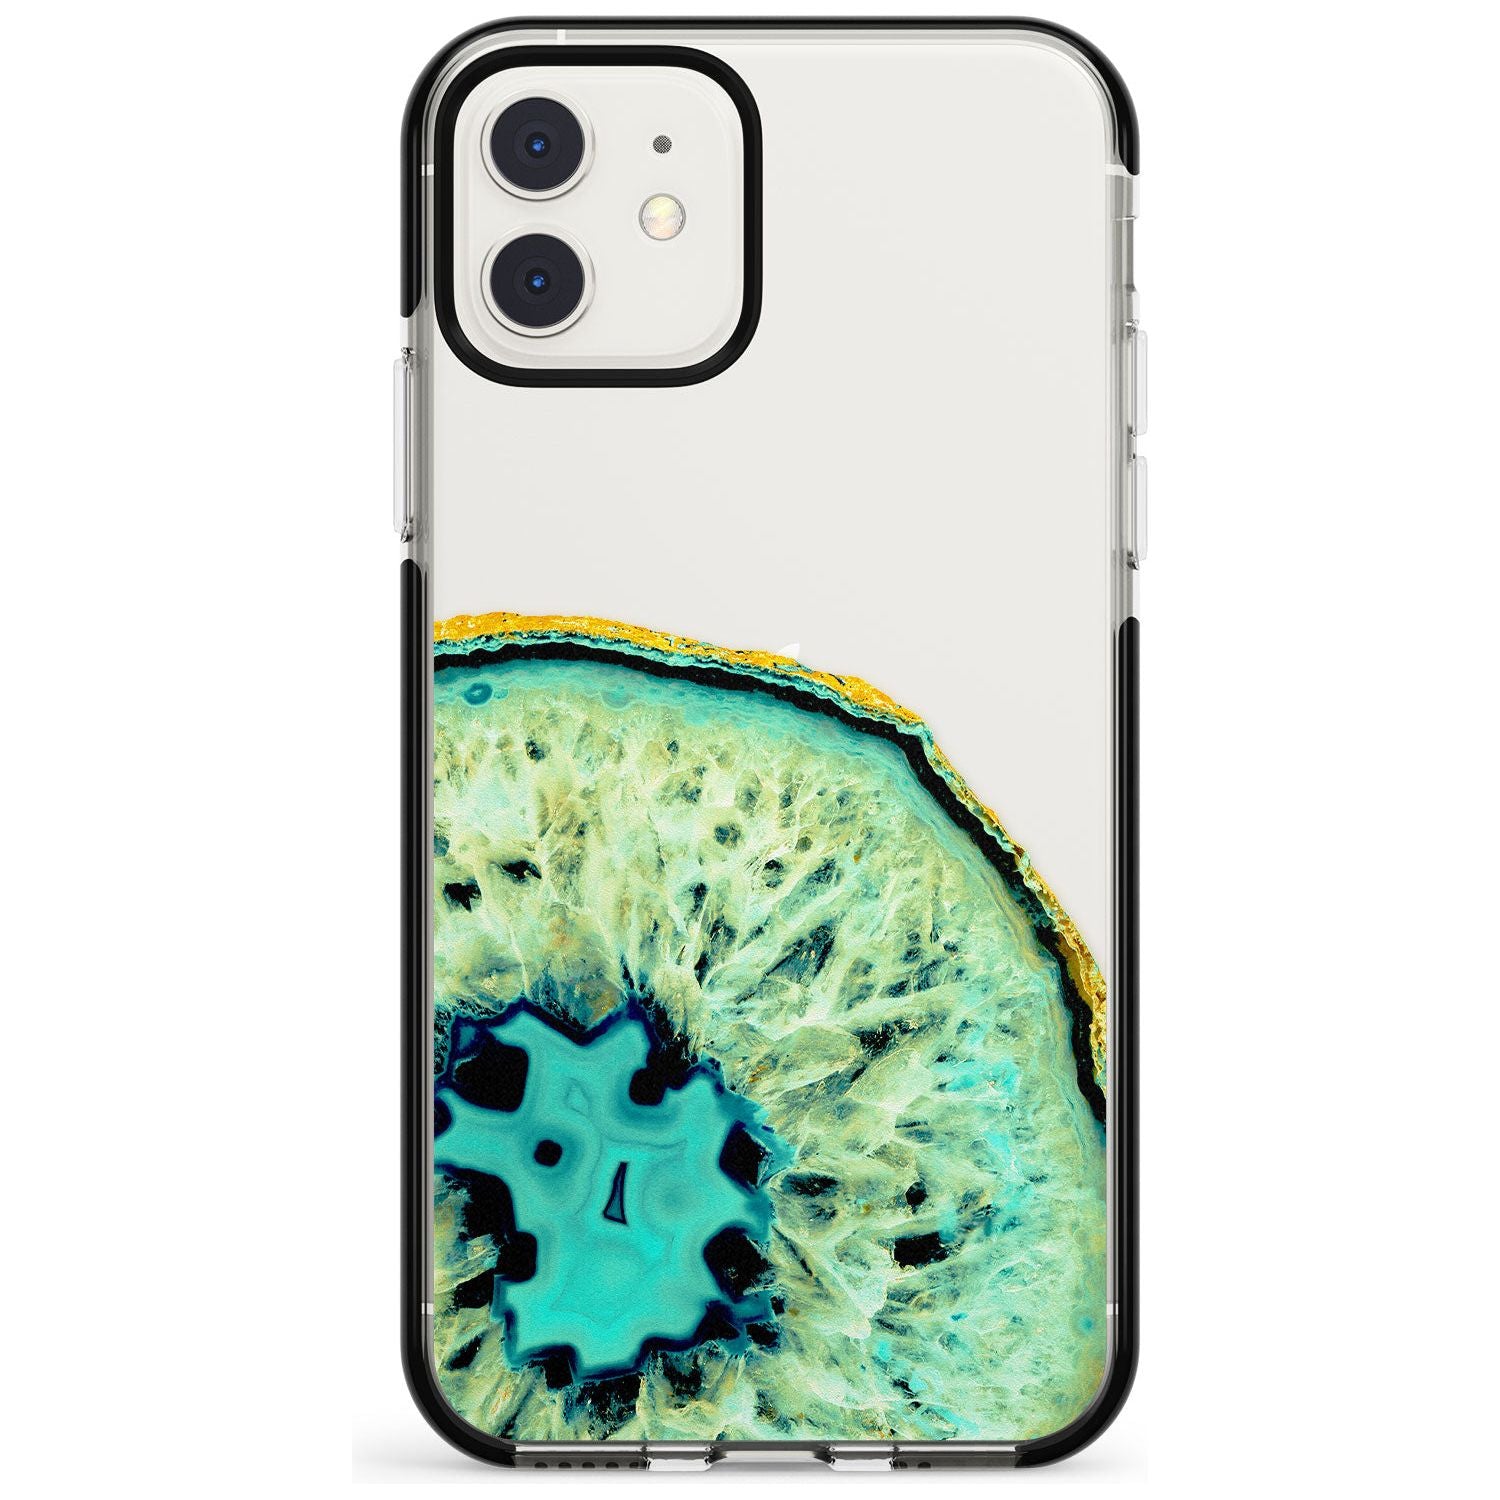 Turquoise & Green Gemstone Crystal Clear Design Black Impact Phone Case for iPhone 11